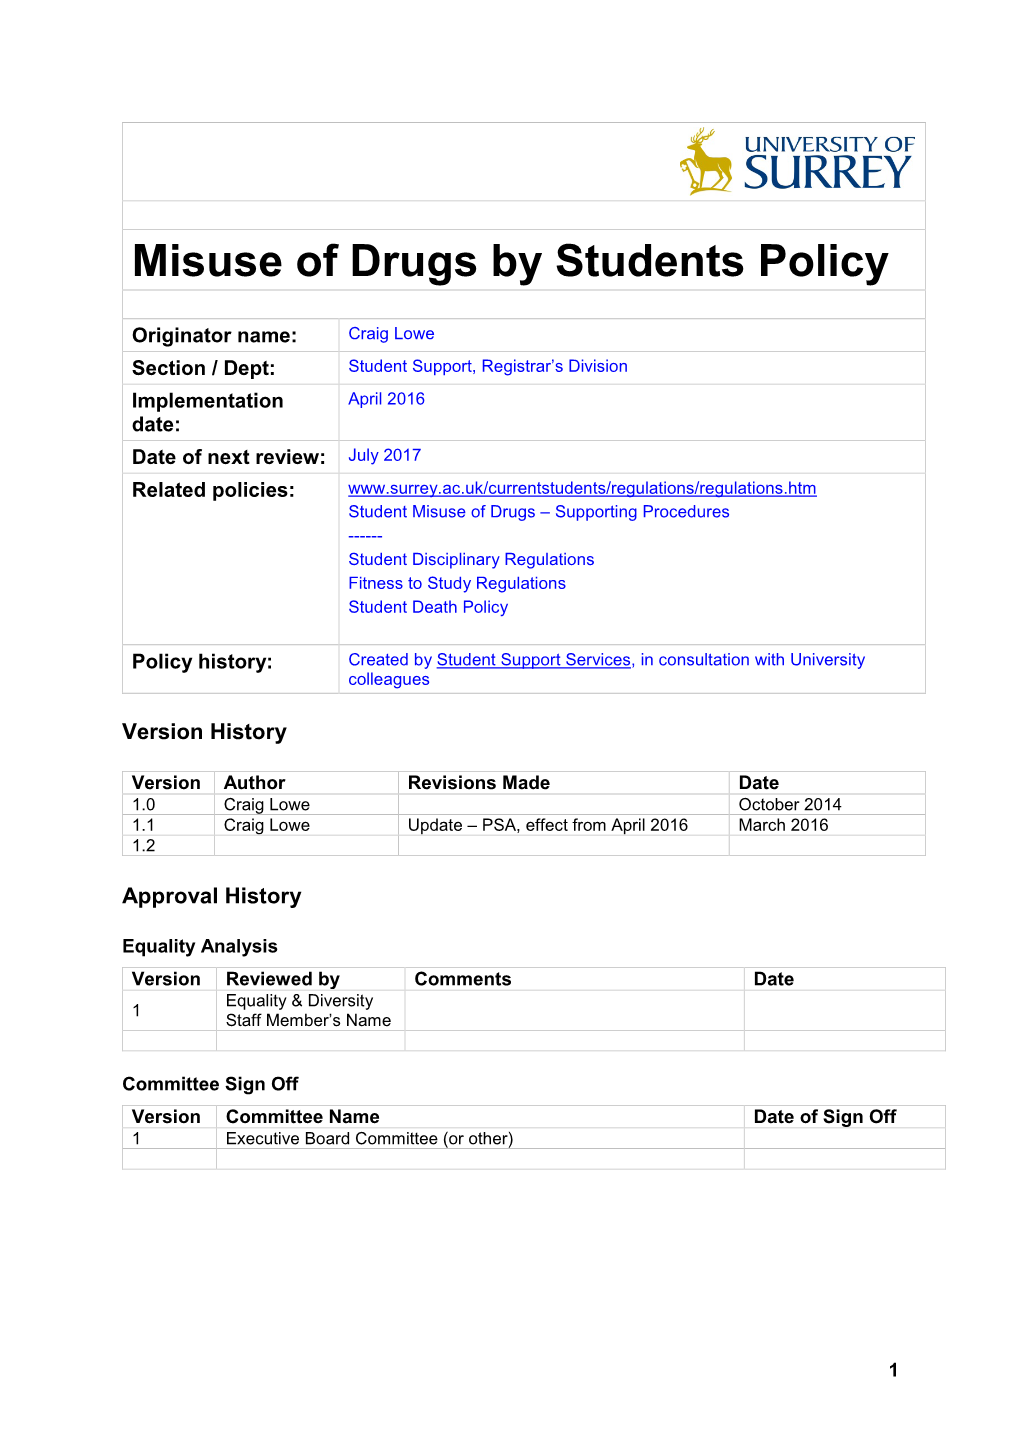 Misuse of Drugs by Students Policy